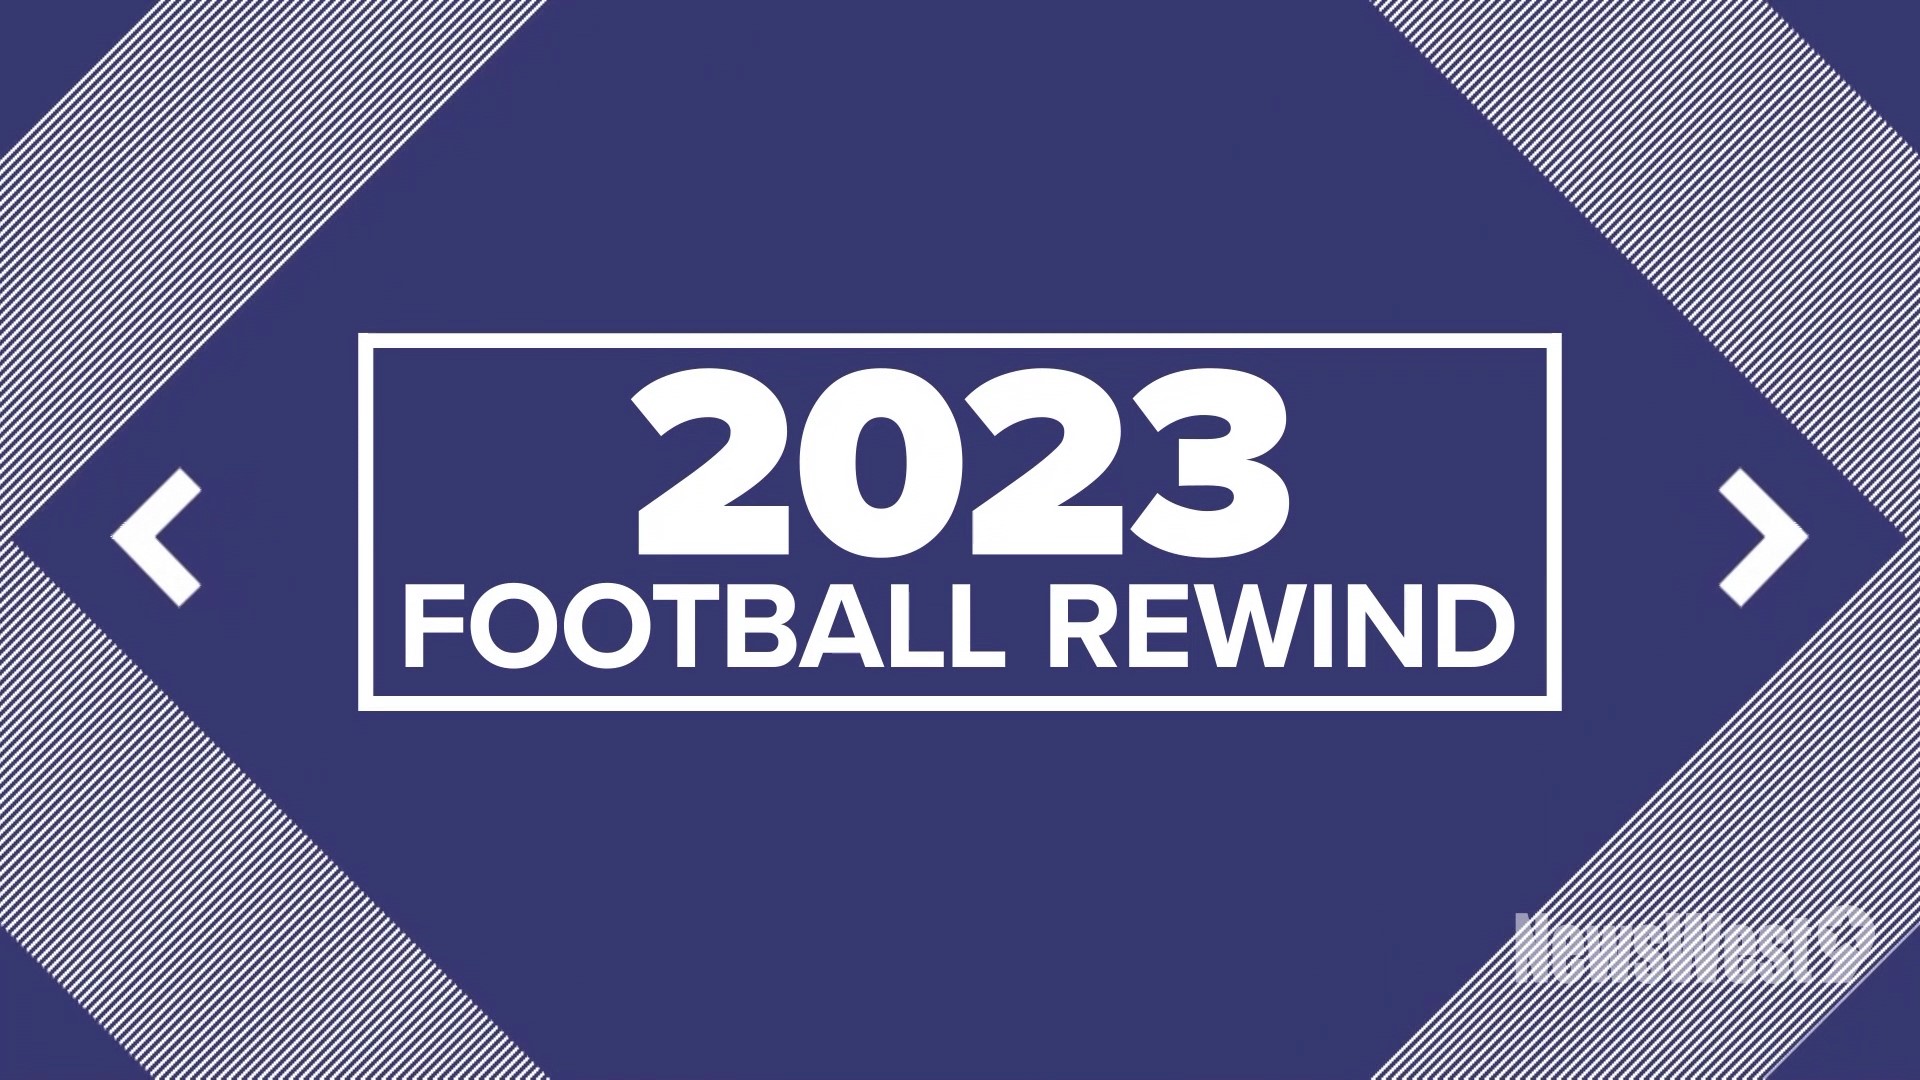 Rewind the past year in football as Jenna Elique tells you some of the standout stories from the West Texas football world.